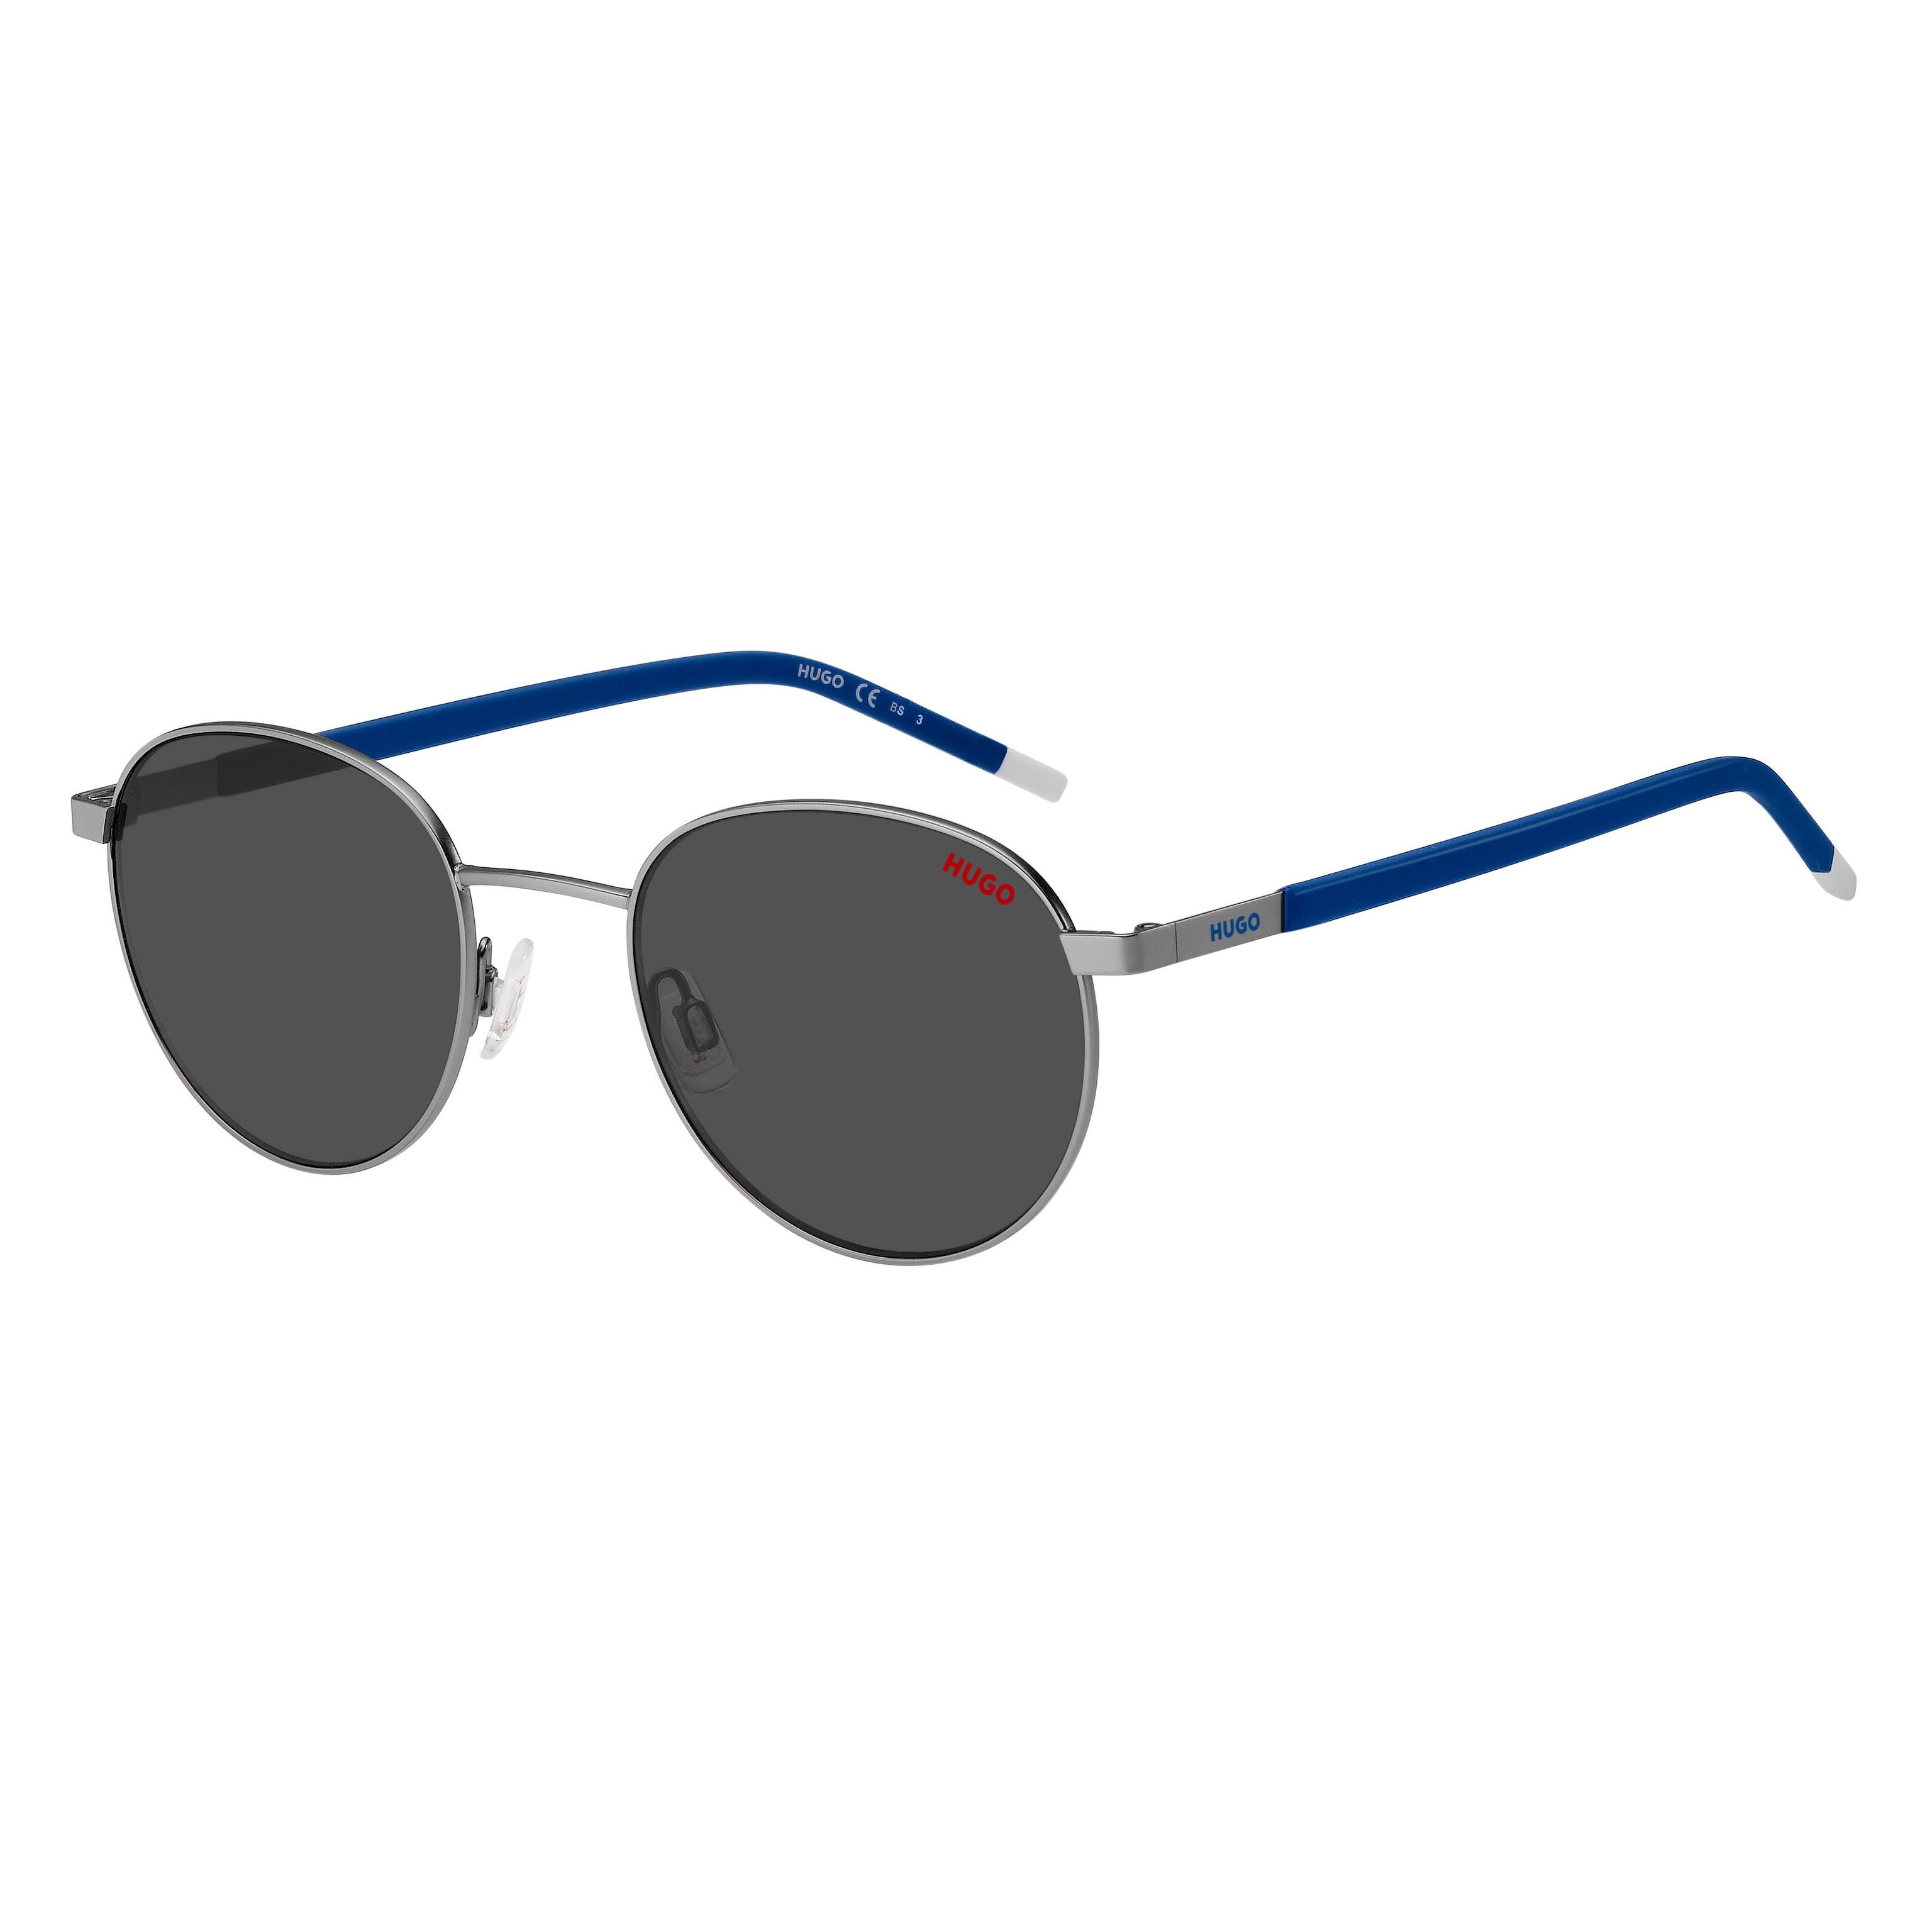 HG 1230 S Round Sunglasses PJP - size 50